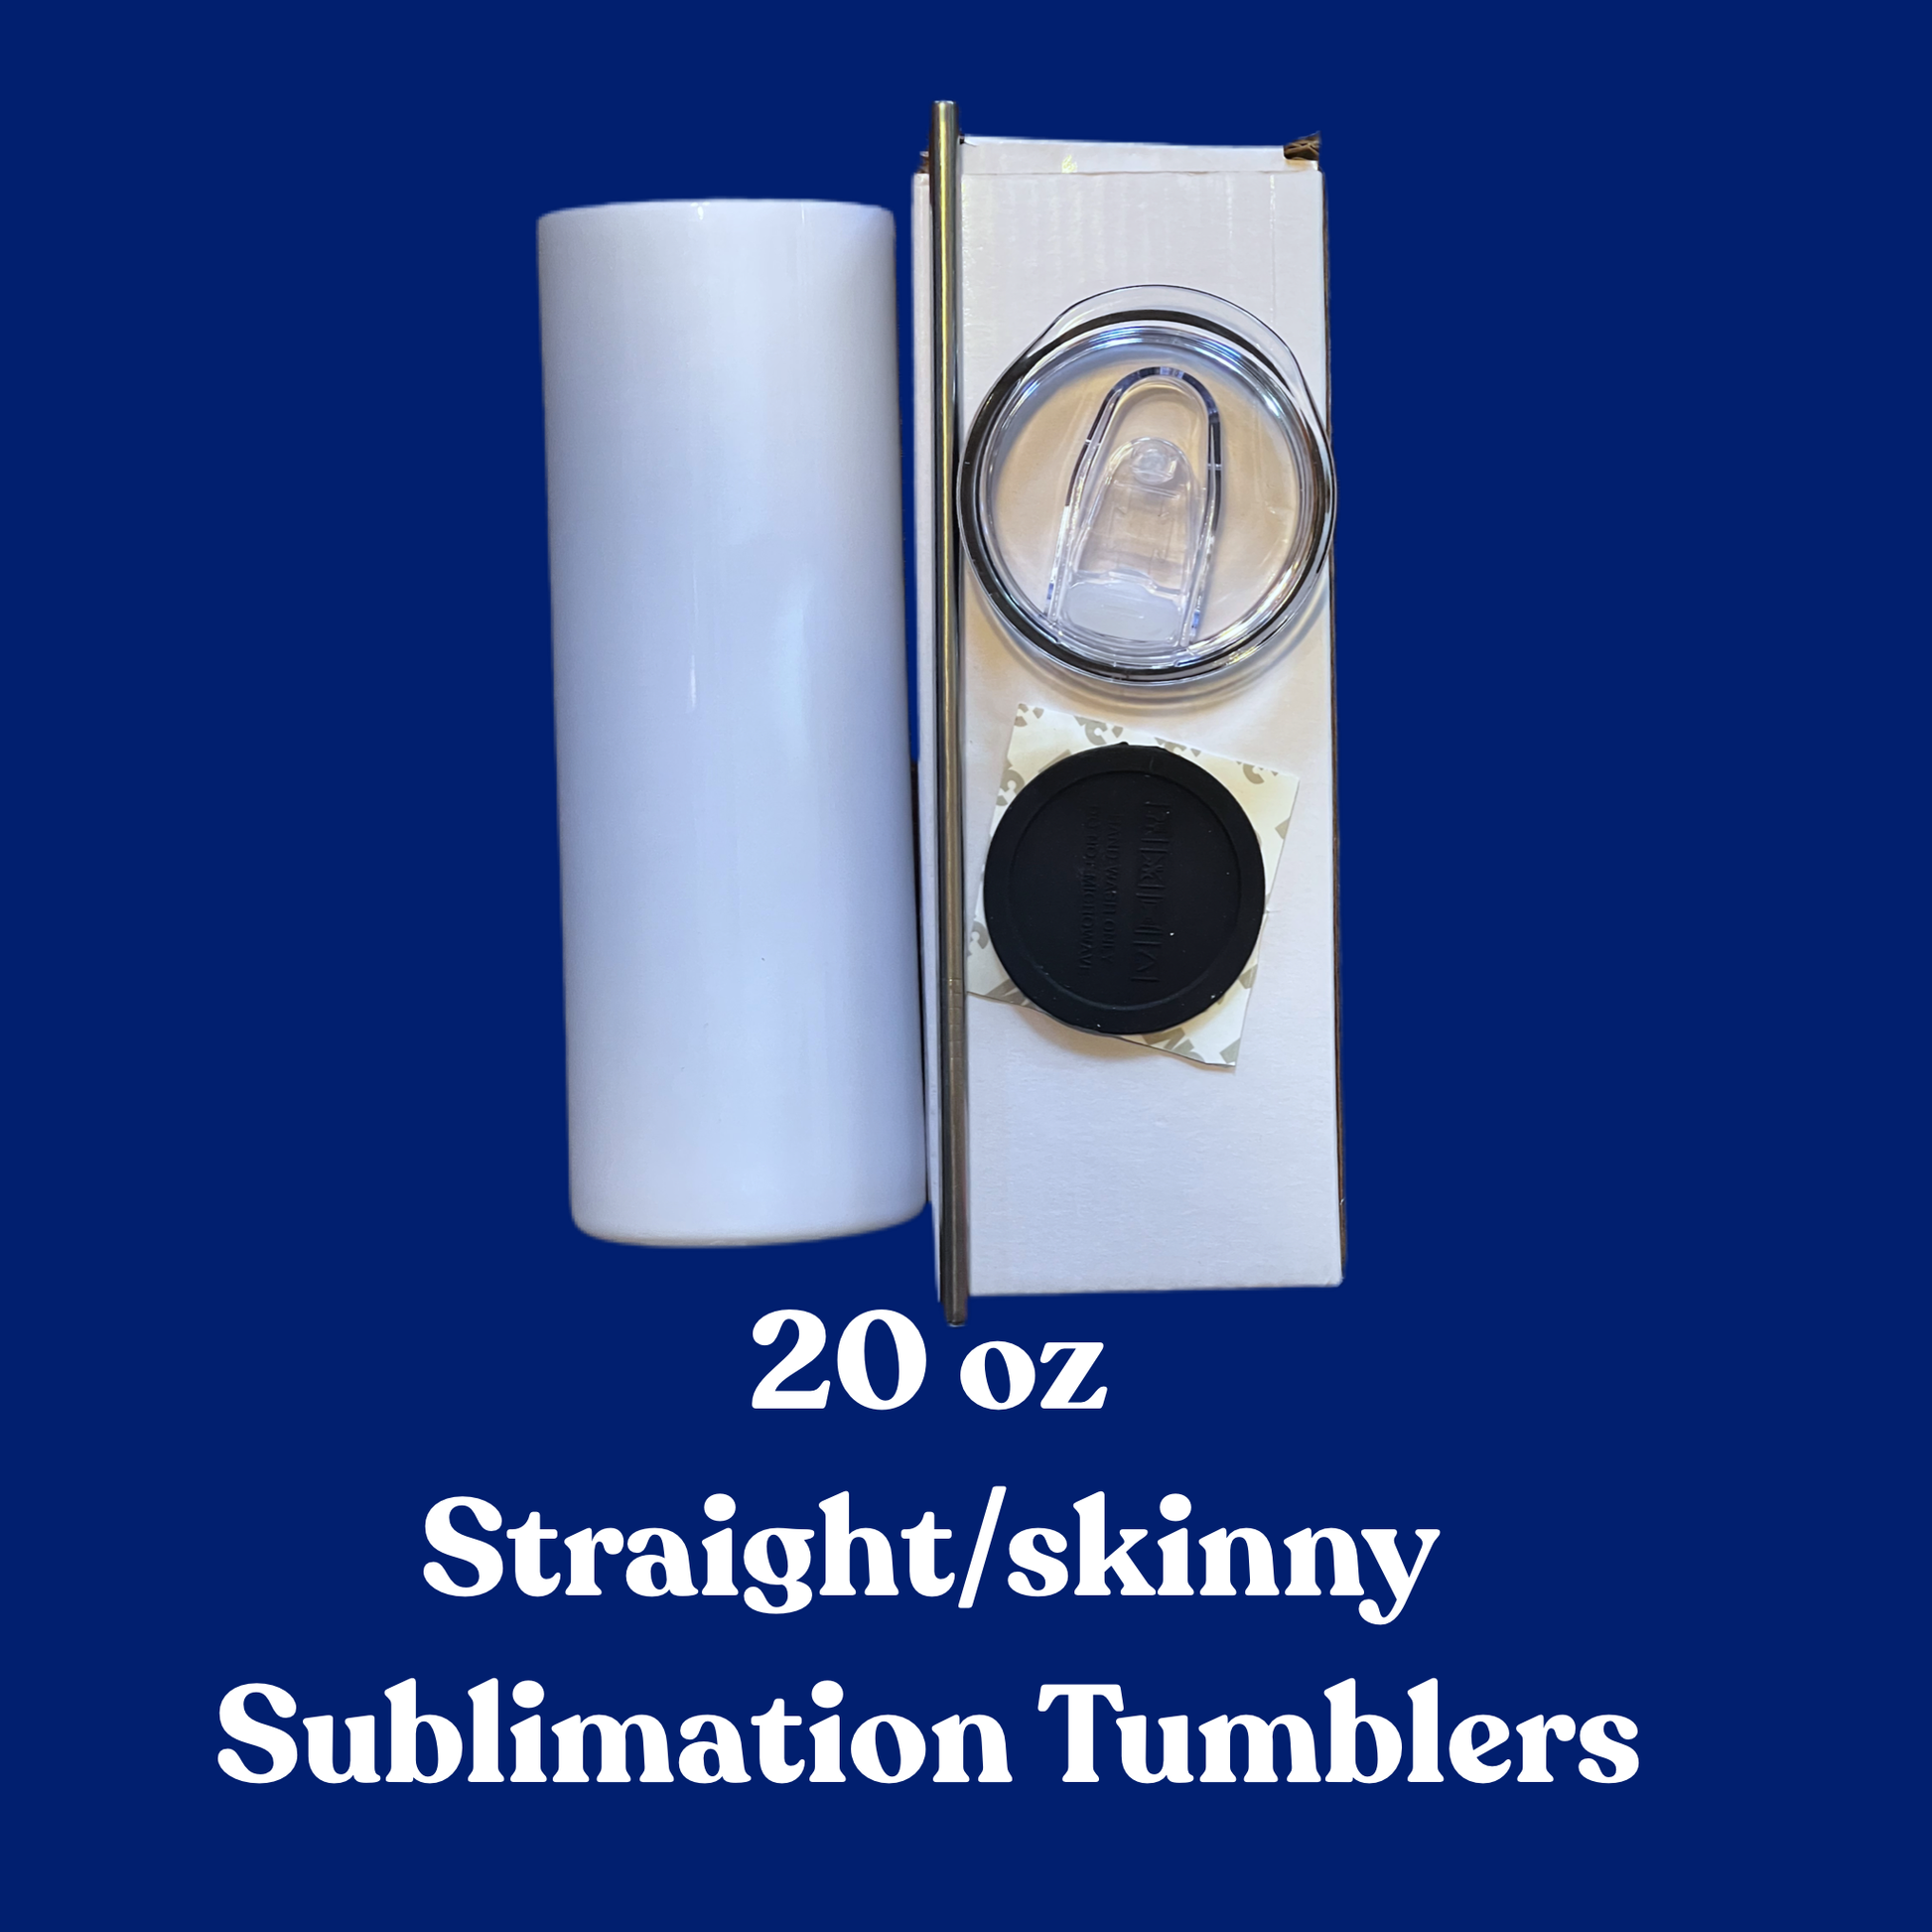 Munskine 4 Pack Sublimation Tumblers 20 Oz Skinny Stainless Steel Double